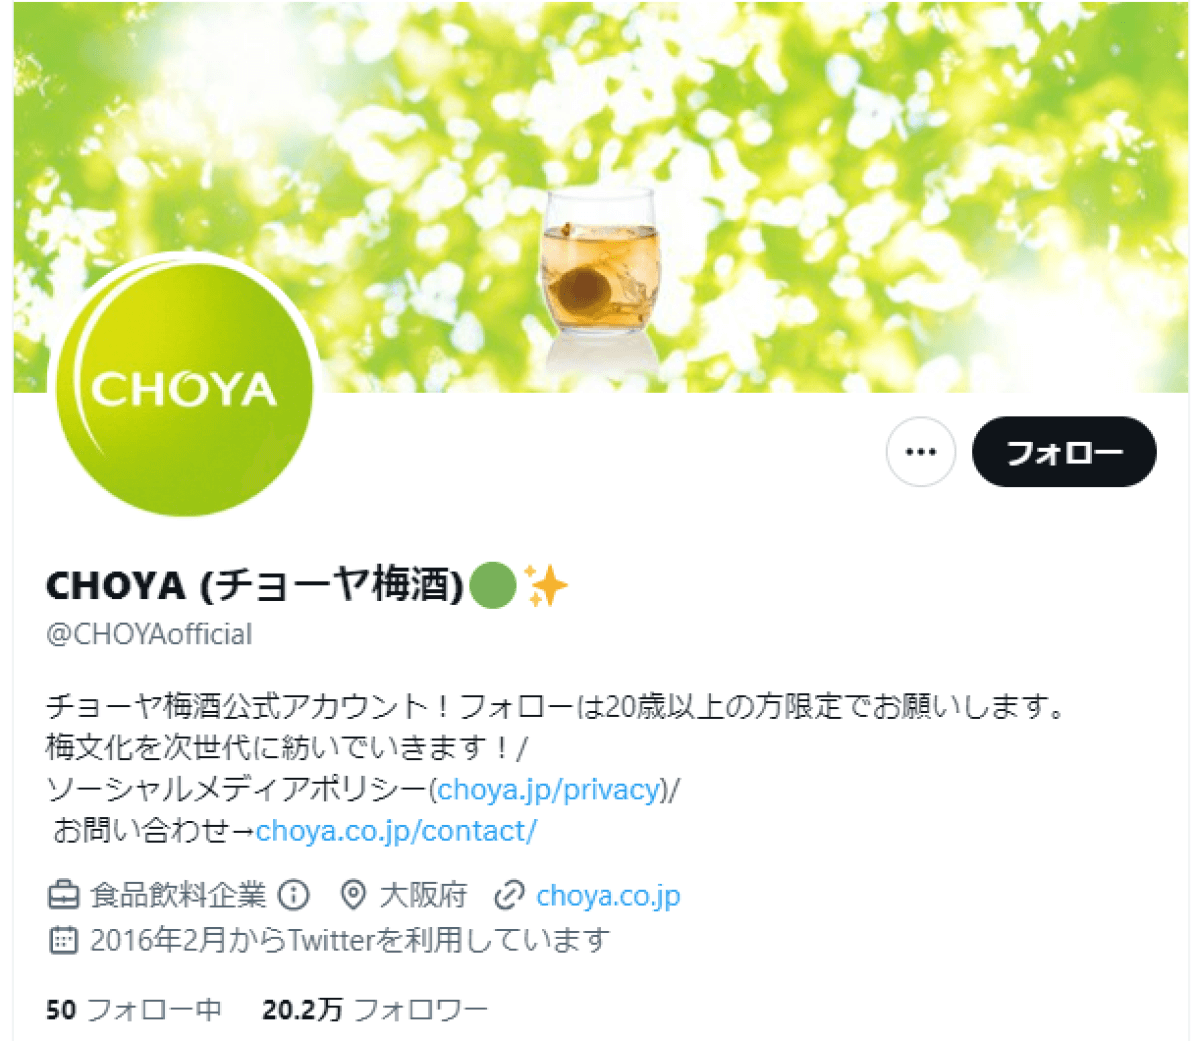 twitter-account-choyaofficial